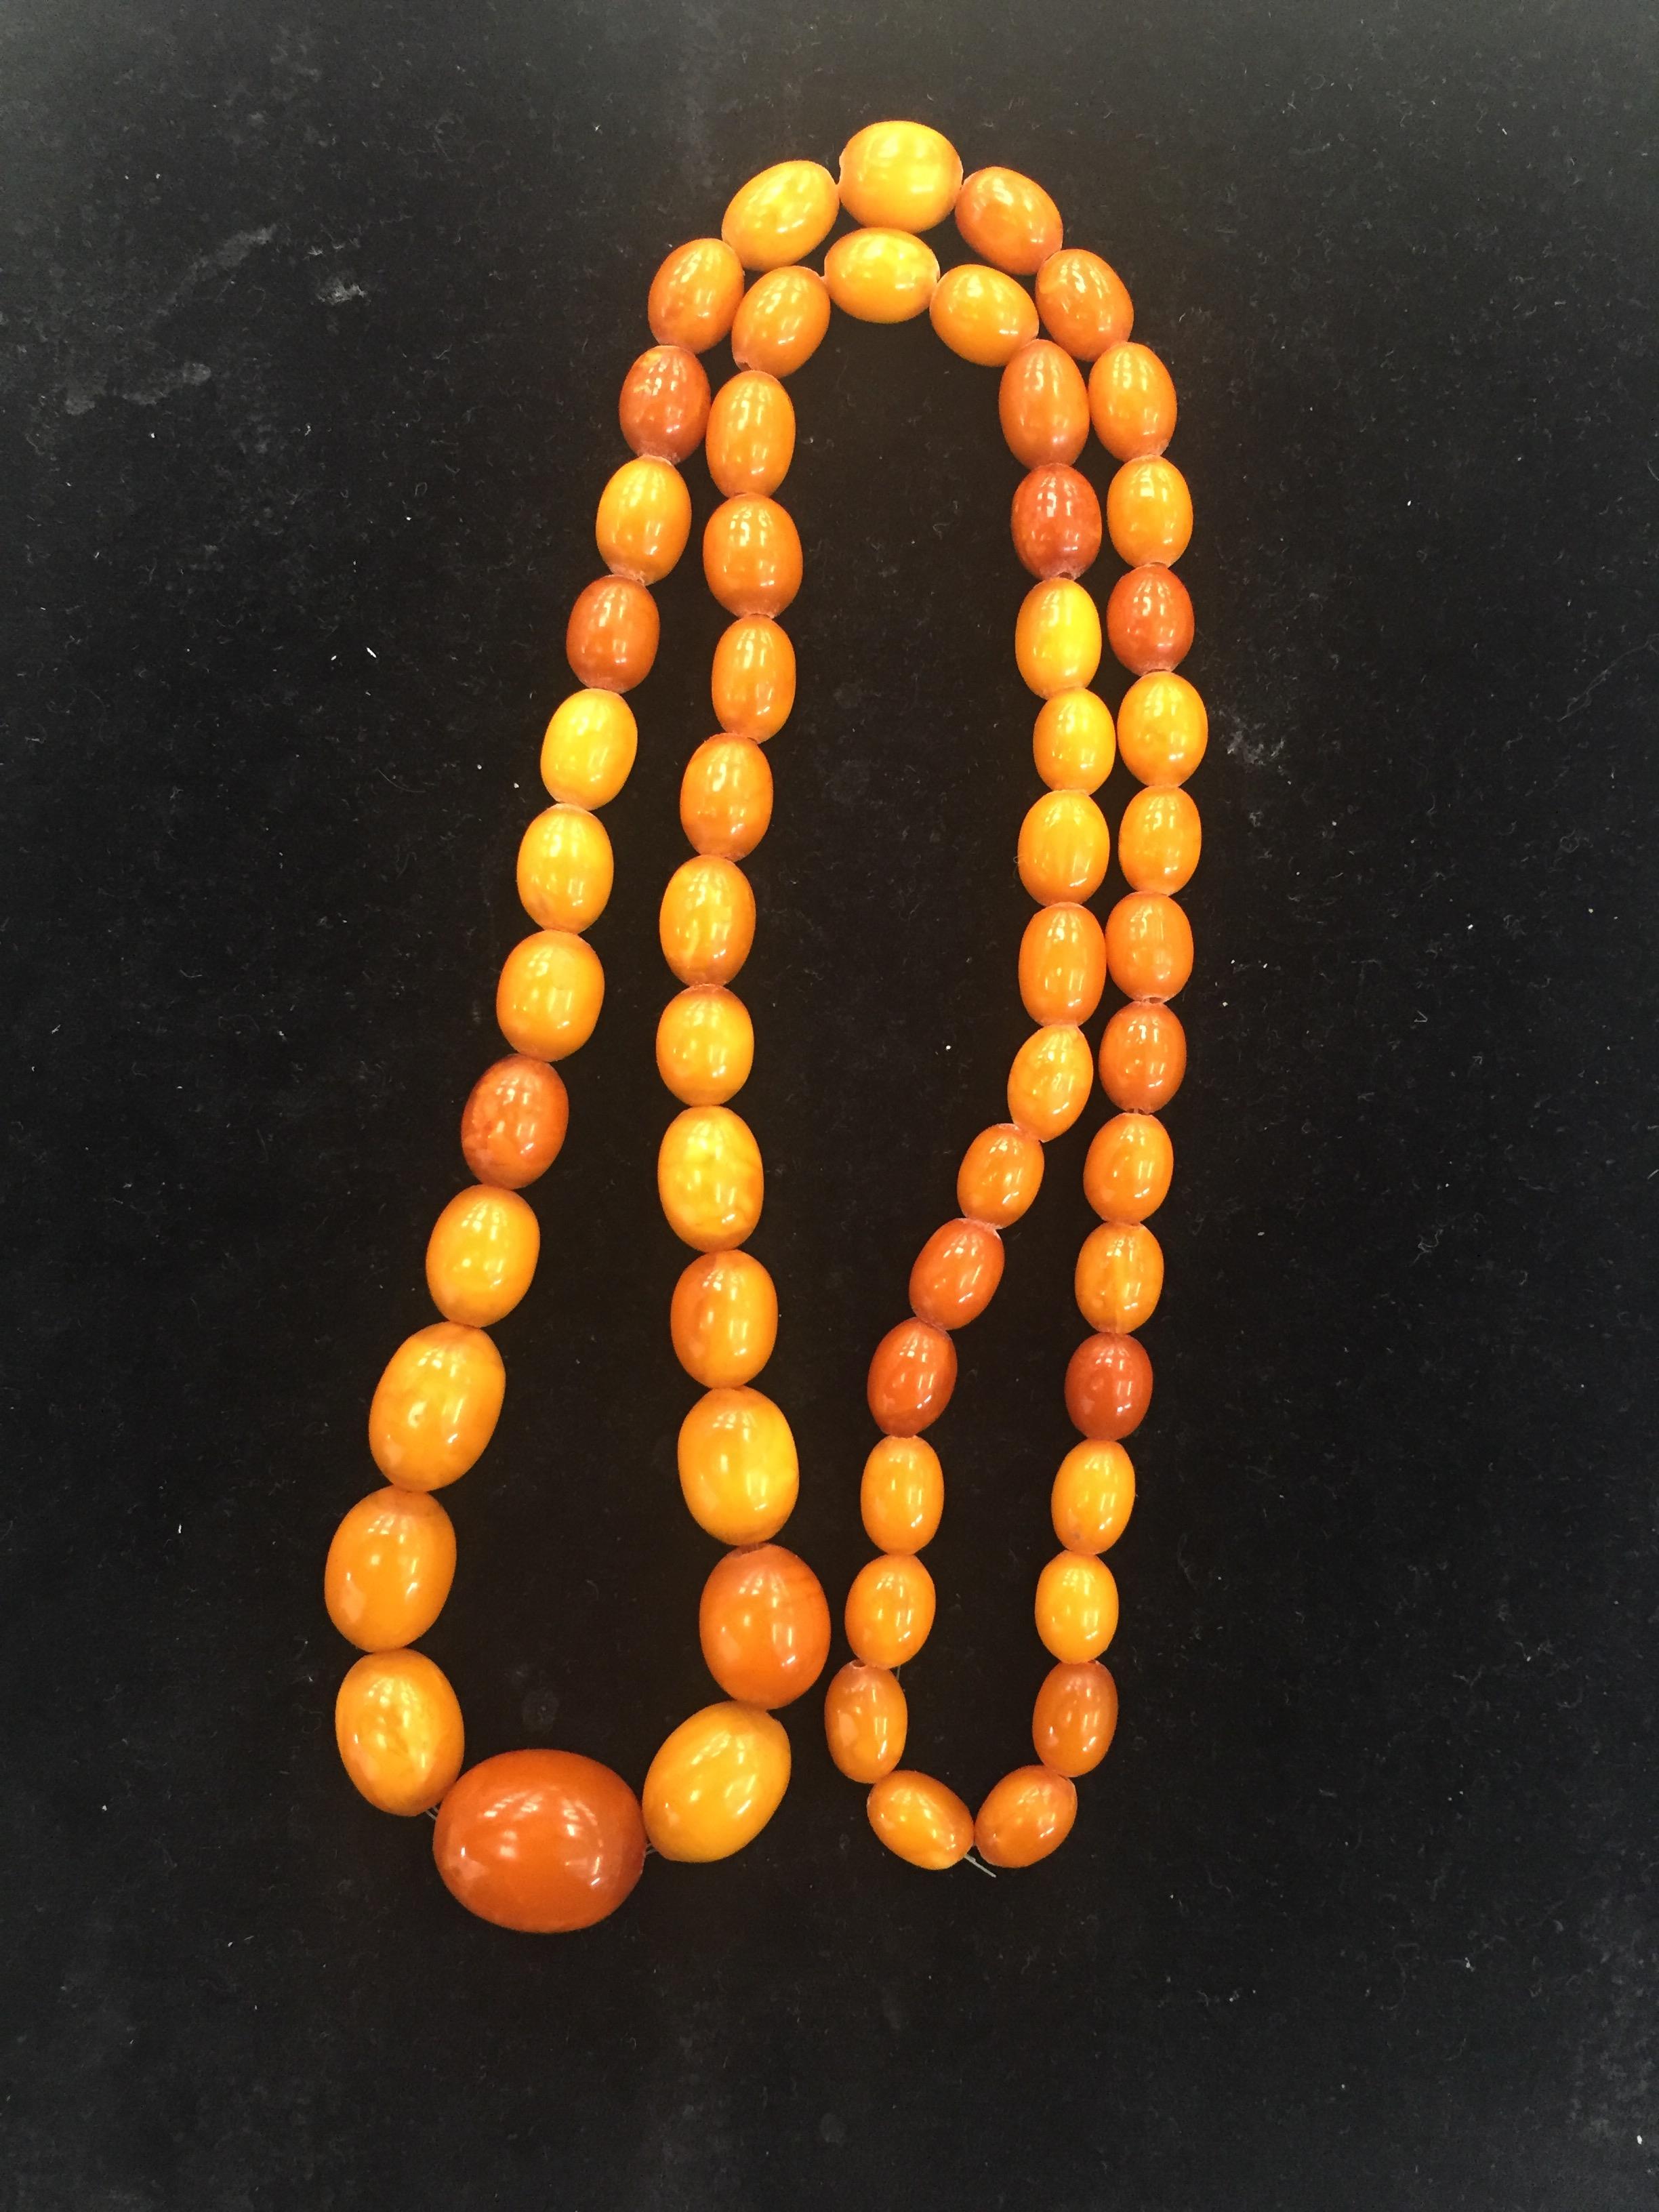 A barrel bead butterscotch amber necklace - Image 5 of 7